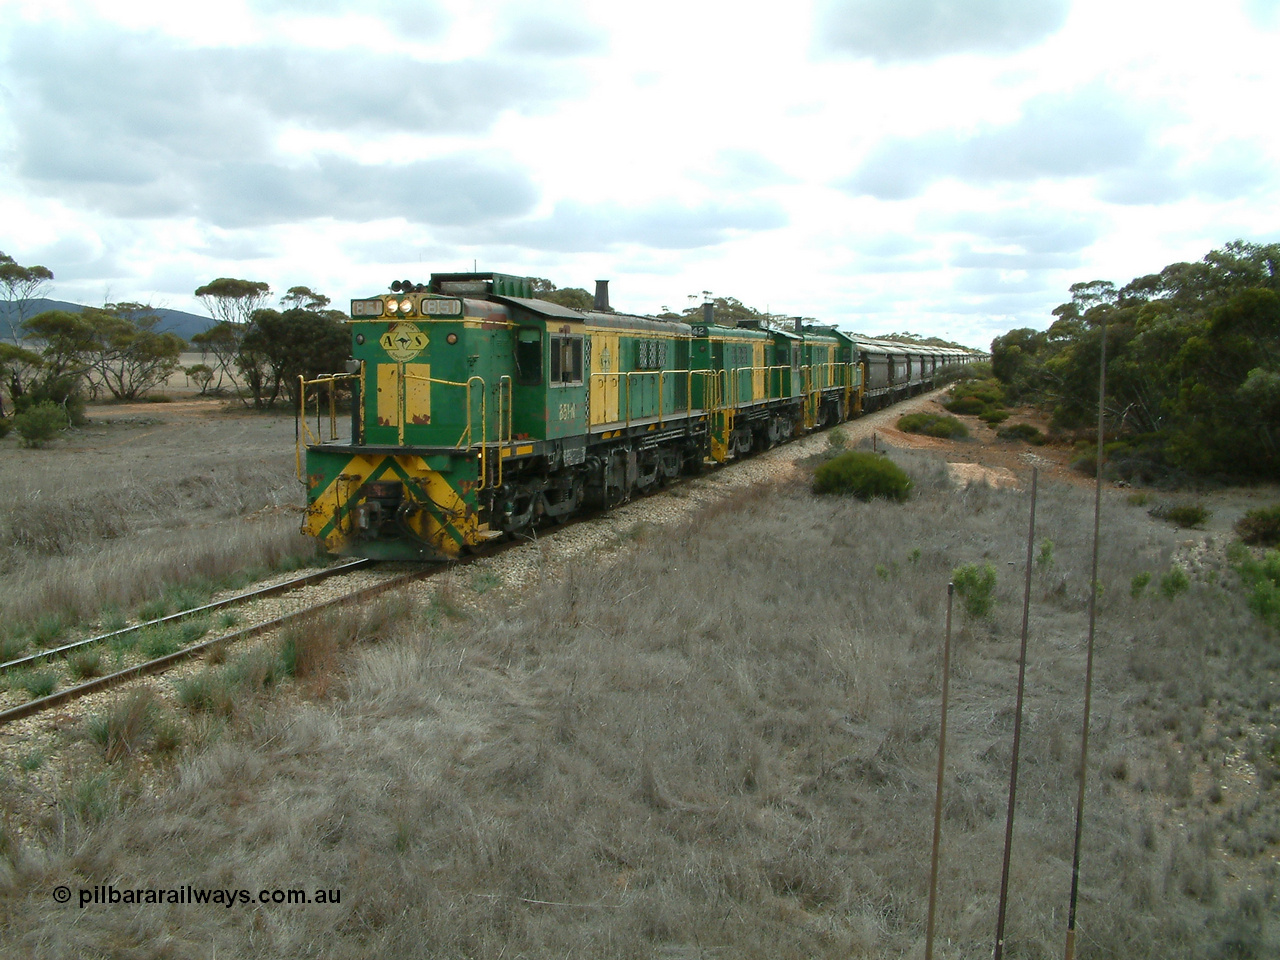 030409 115600
Darke Peake, at the 195 km Dog Fence Road grade crossing loaded grain train with 830 class unit 851 AE Goodwin ALCo model DL531 serial 84137, 851 has spent its entire operating career on the Eyre Peninsula, leads fellow 830 class 842 serial 84140 and a rebuilt unit DA 4, rebuilt from 830 class unit 839 by Port Augusta Workshops, retains original serial 83730 and model DL531 with the first twelve waggons behind the locos XNW type.
Keywords: 830-class;851;84137;AE-Goodwin;ALCo;DL531;